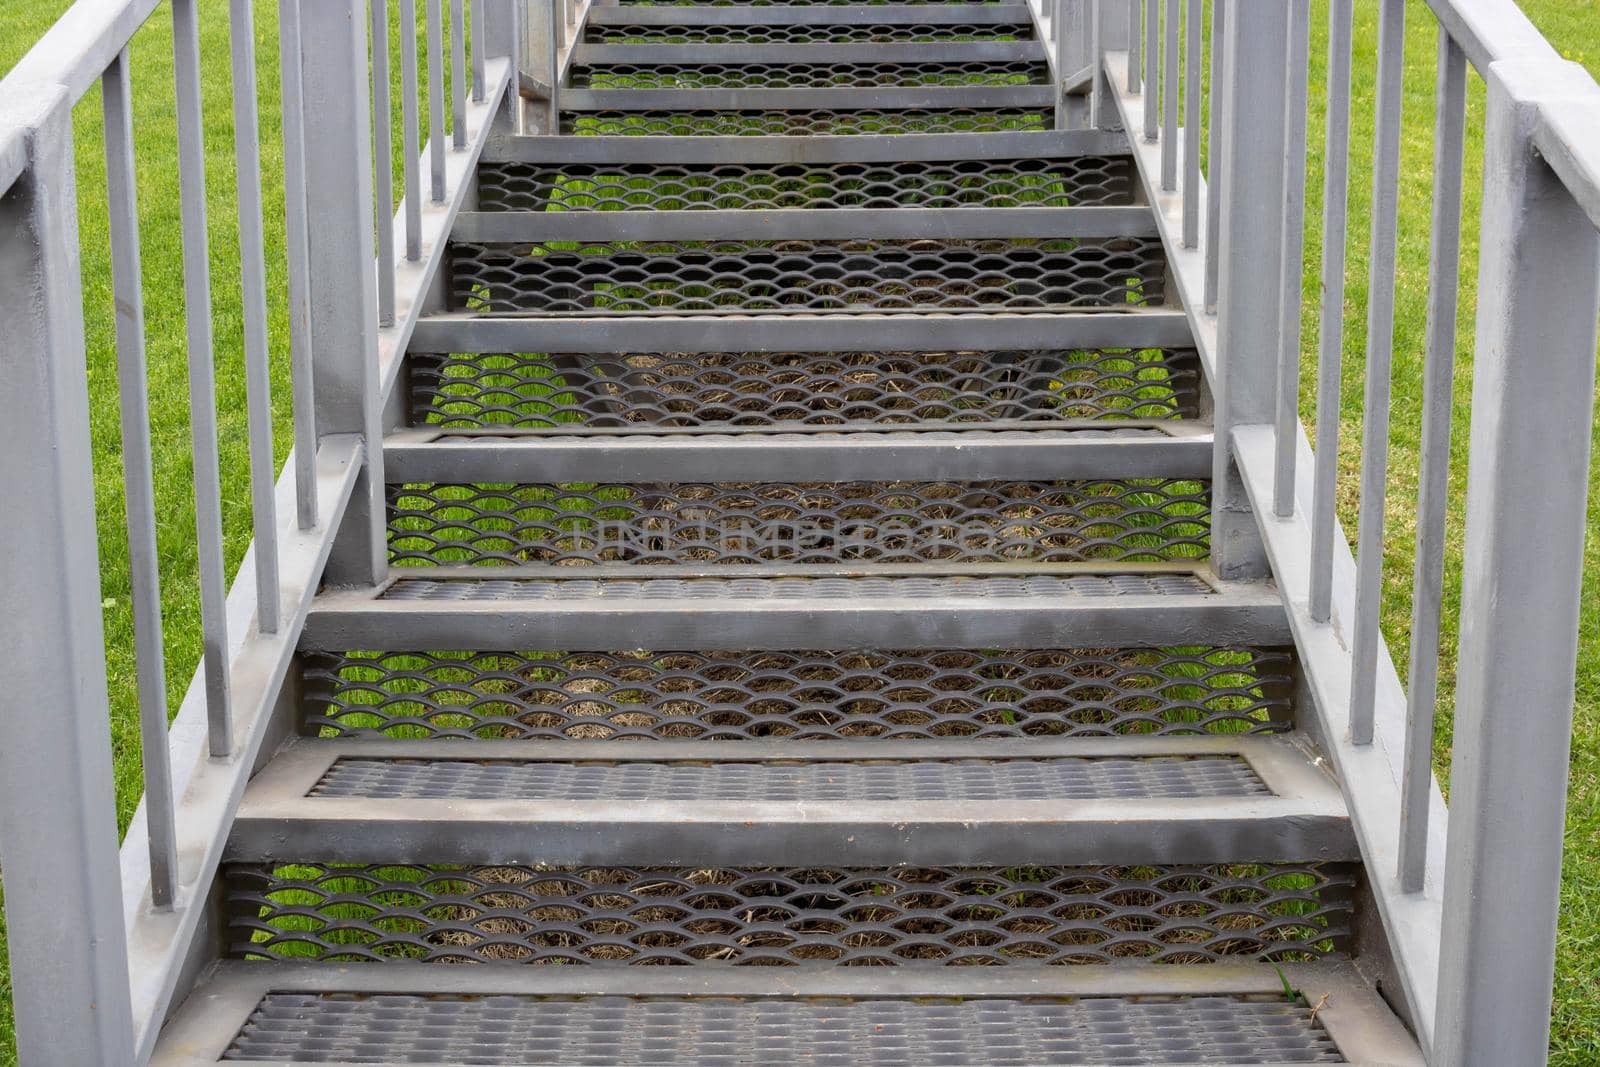 Grey iron staircase with railings on a green grass background.